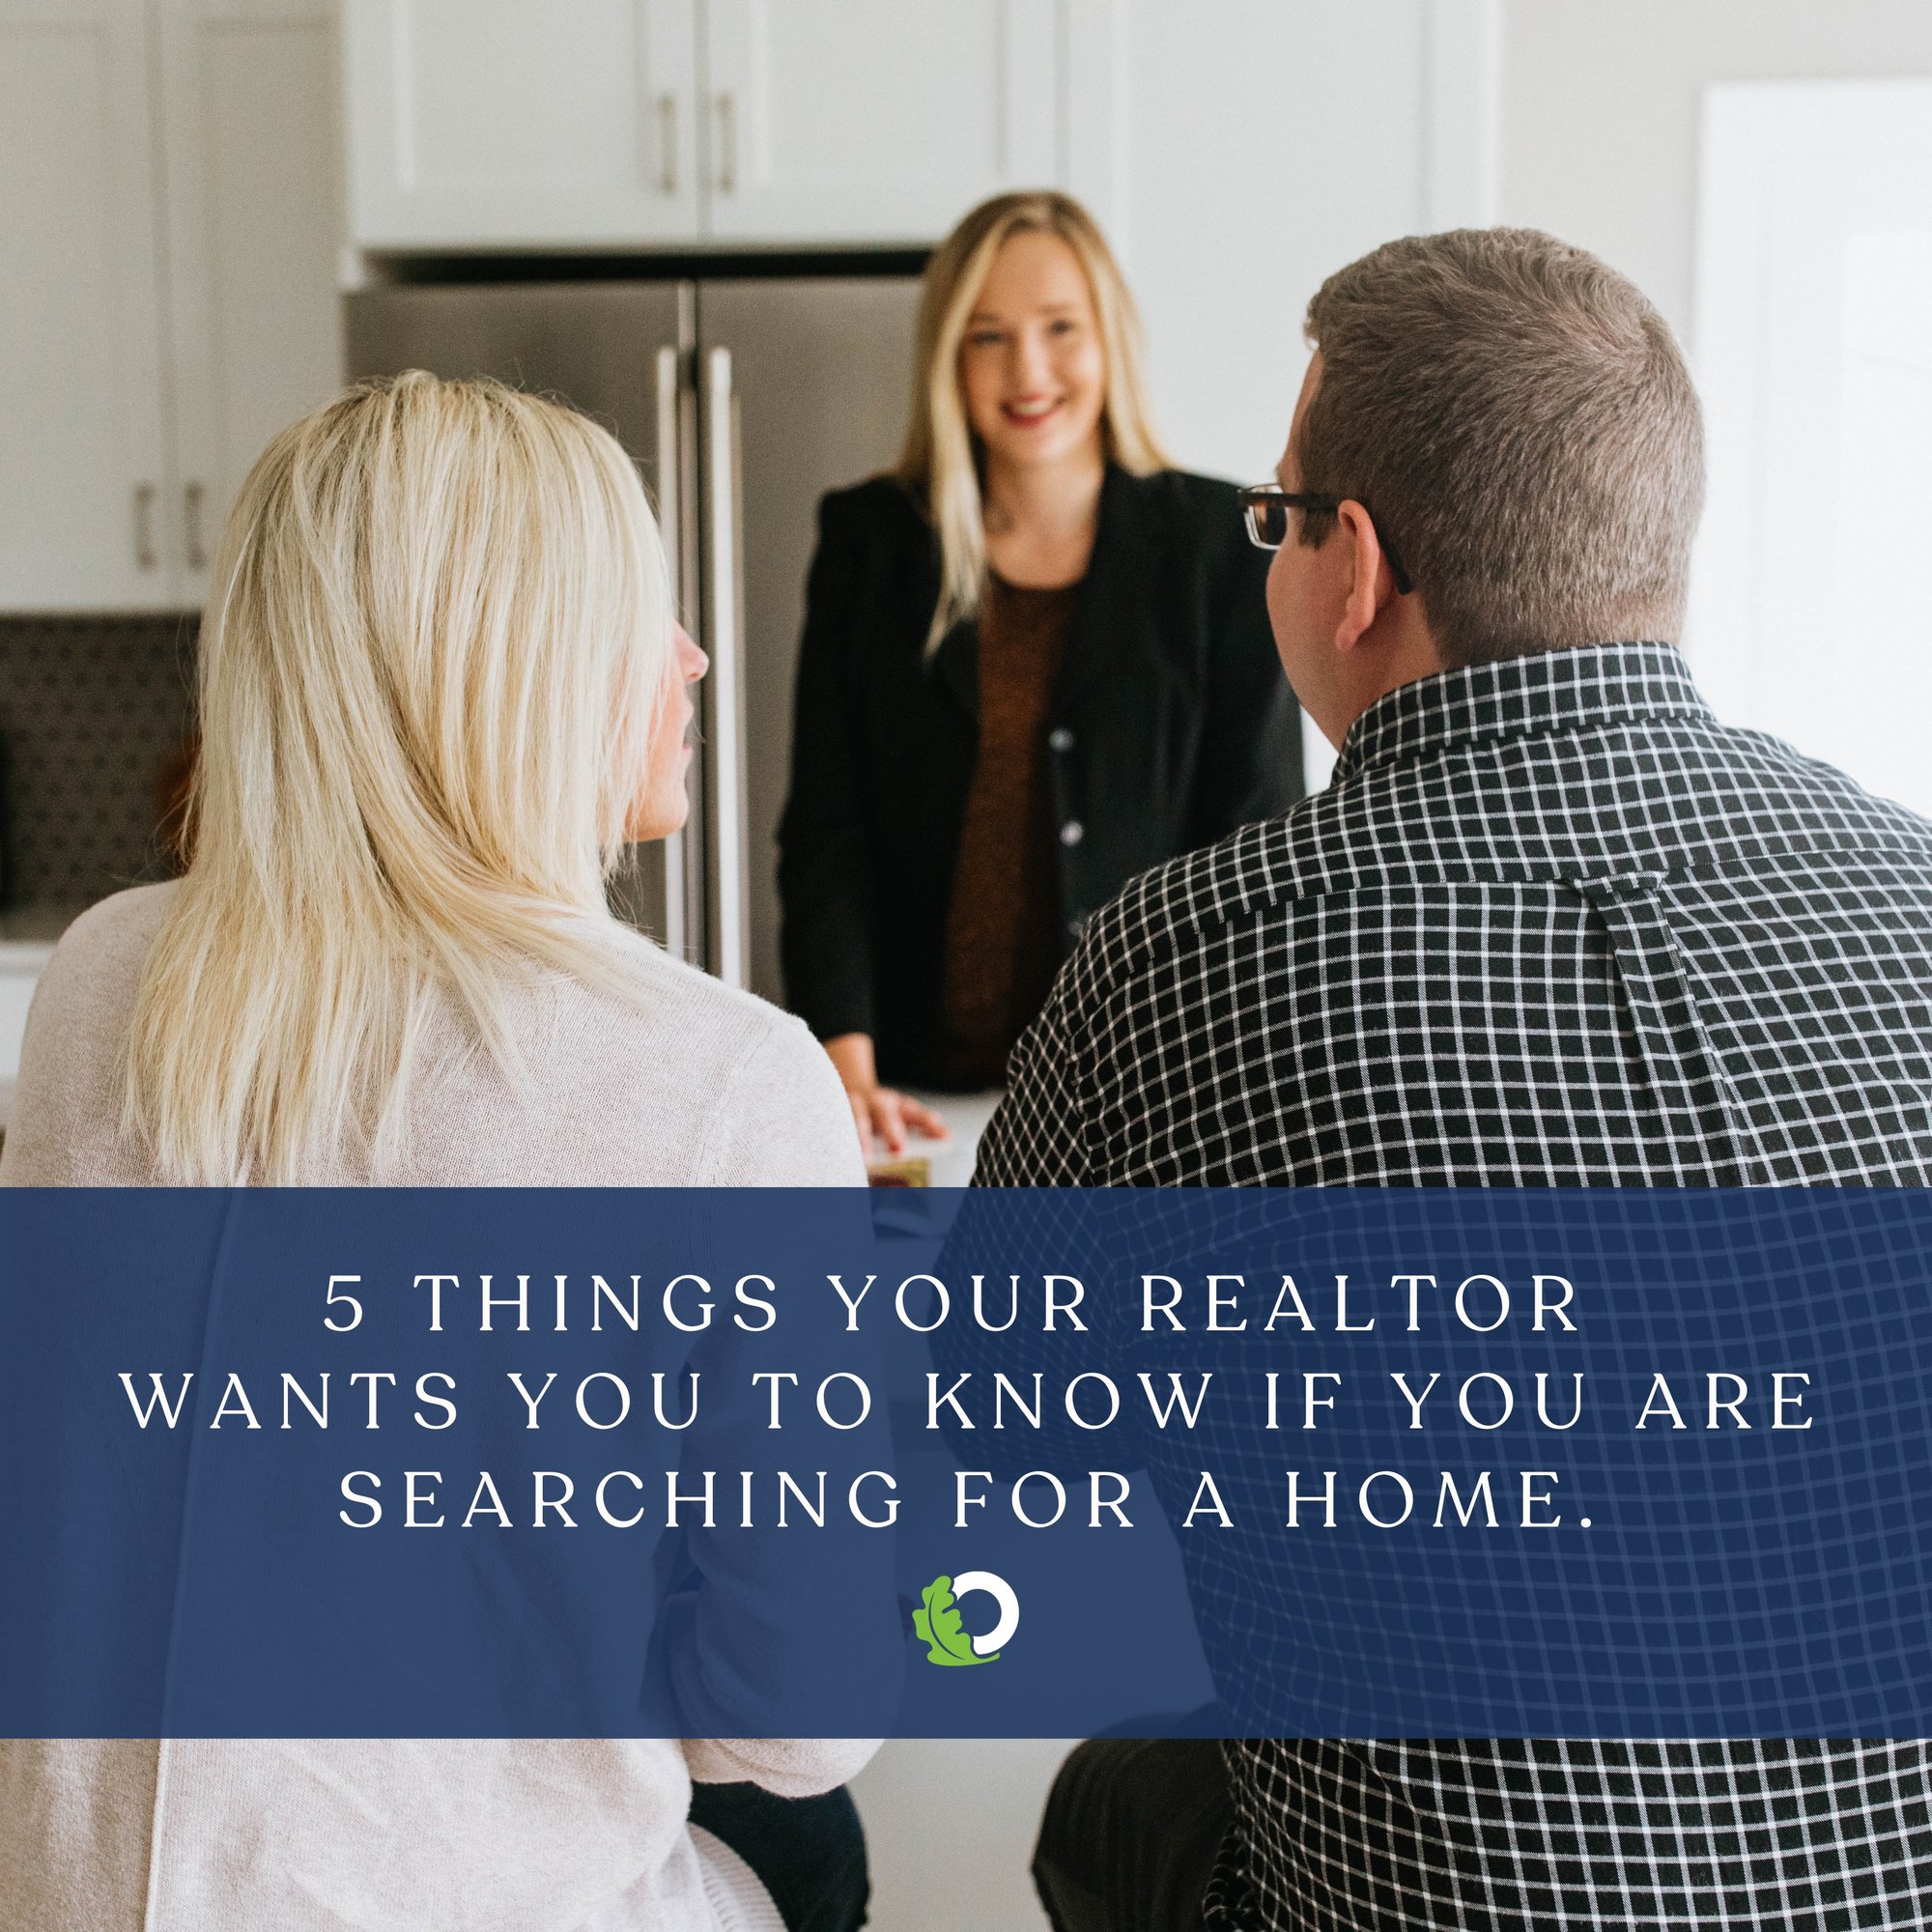 5 Things Your Realtor Wants You to Know if You are Searching for a Home | Oakridge Real Estate